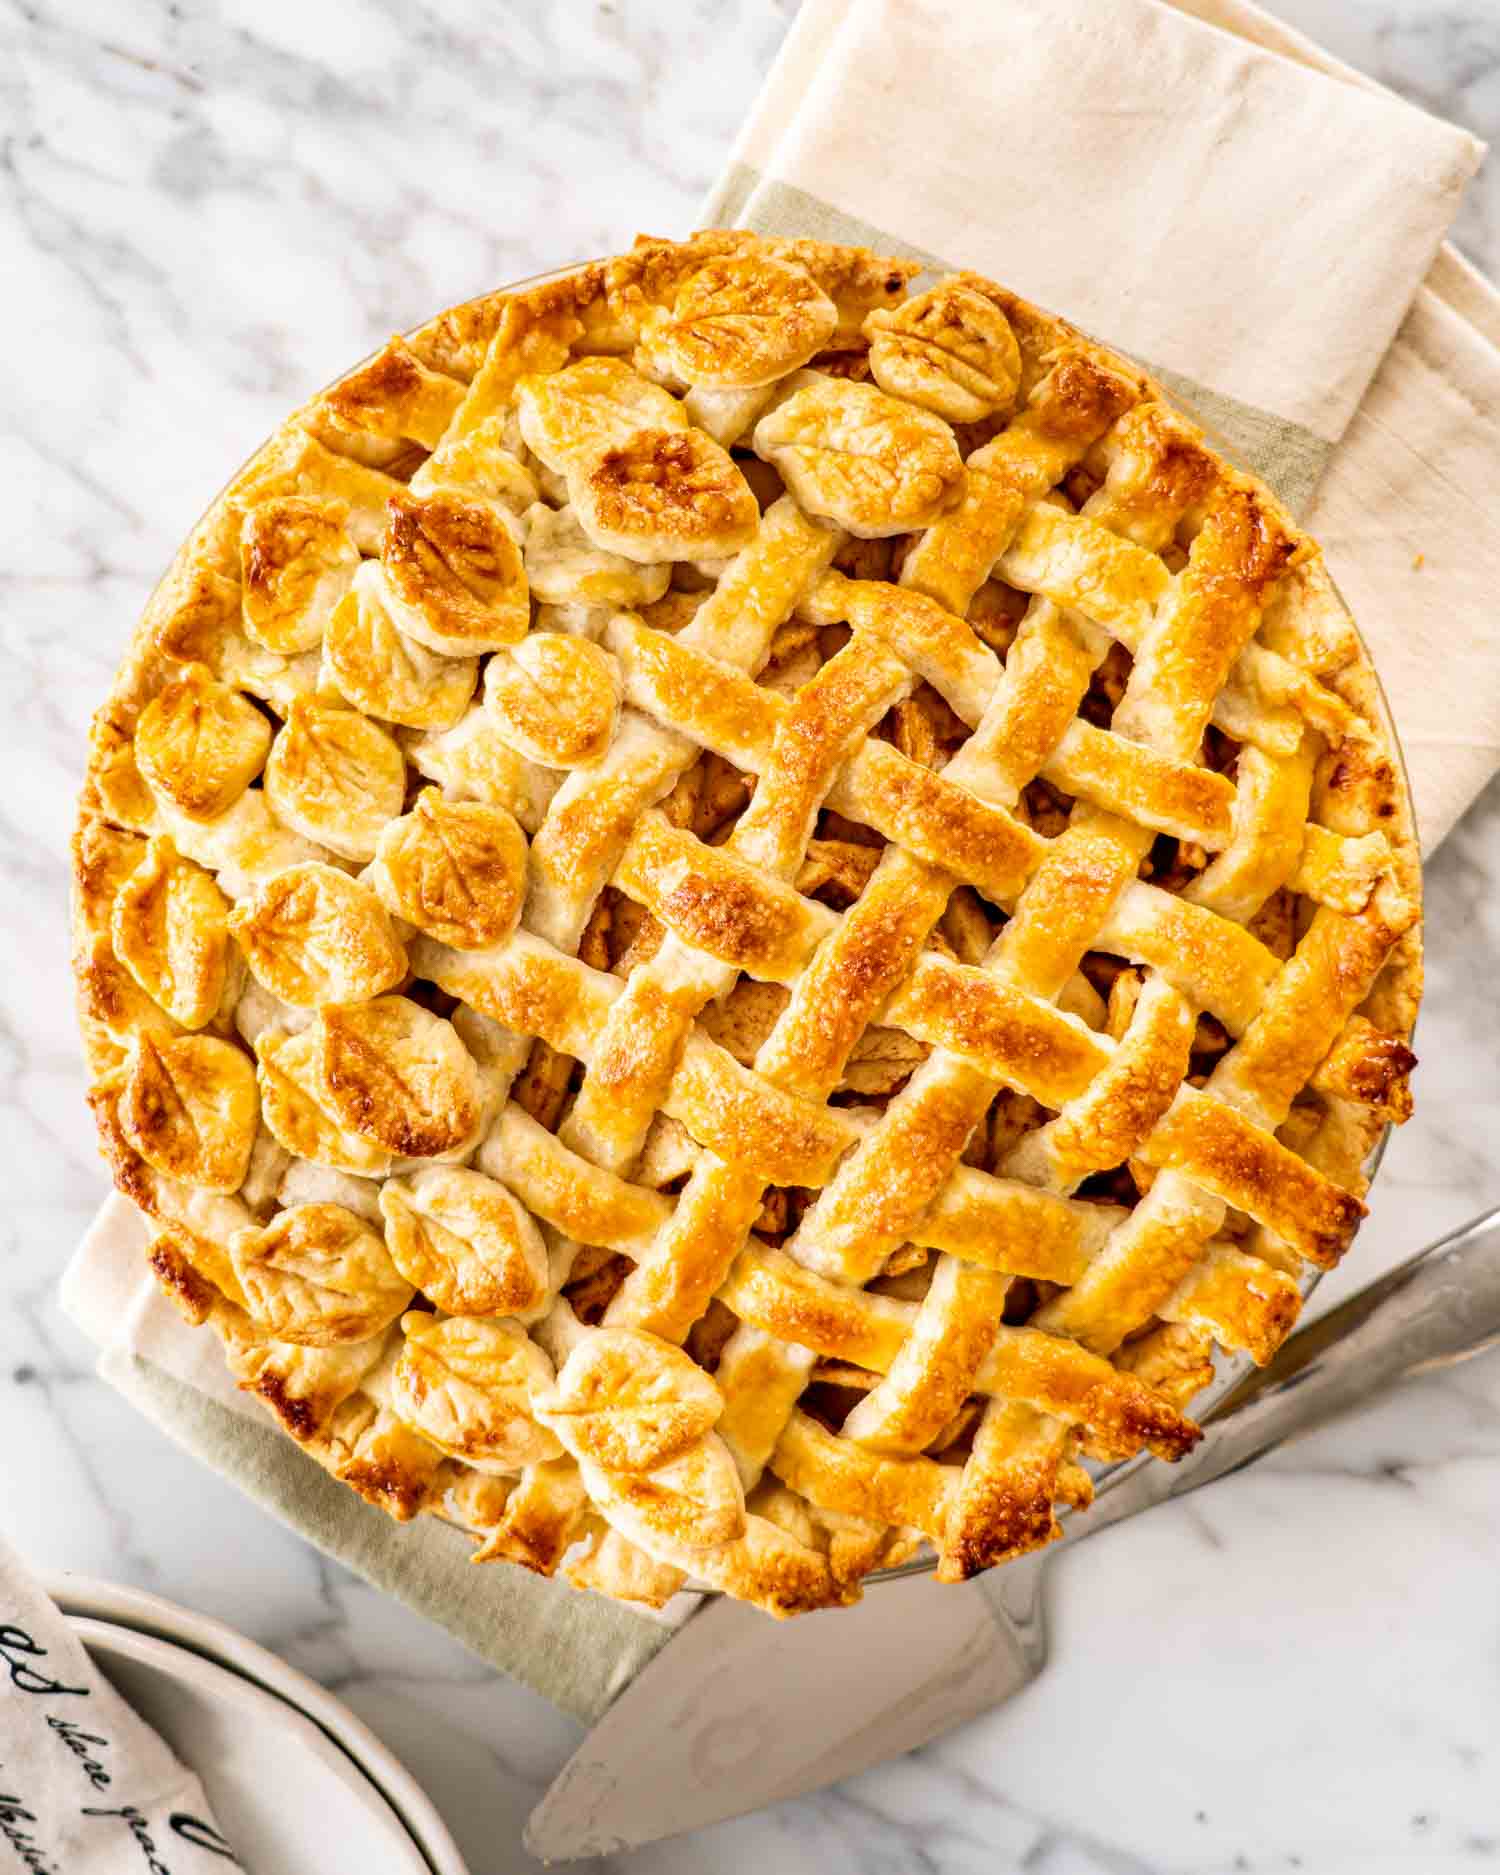 a freshly baked apple pie with lattice top crust.